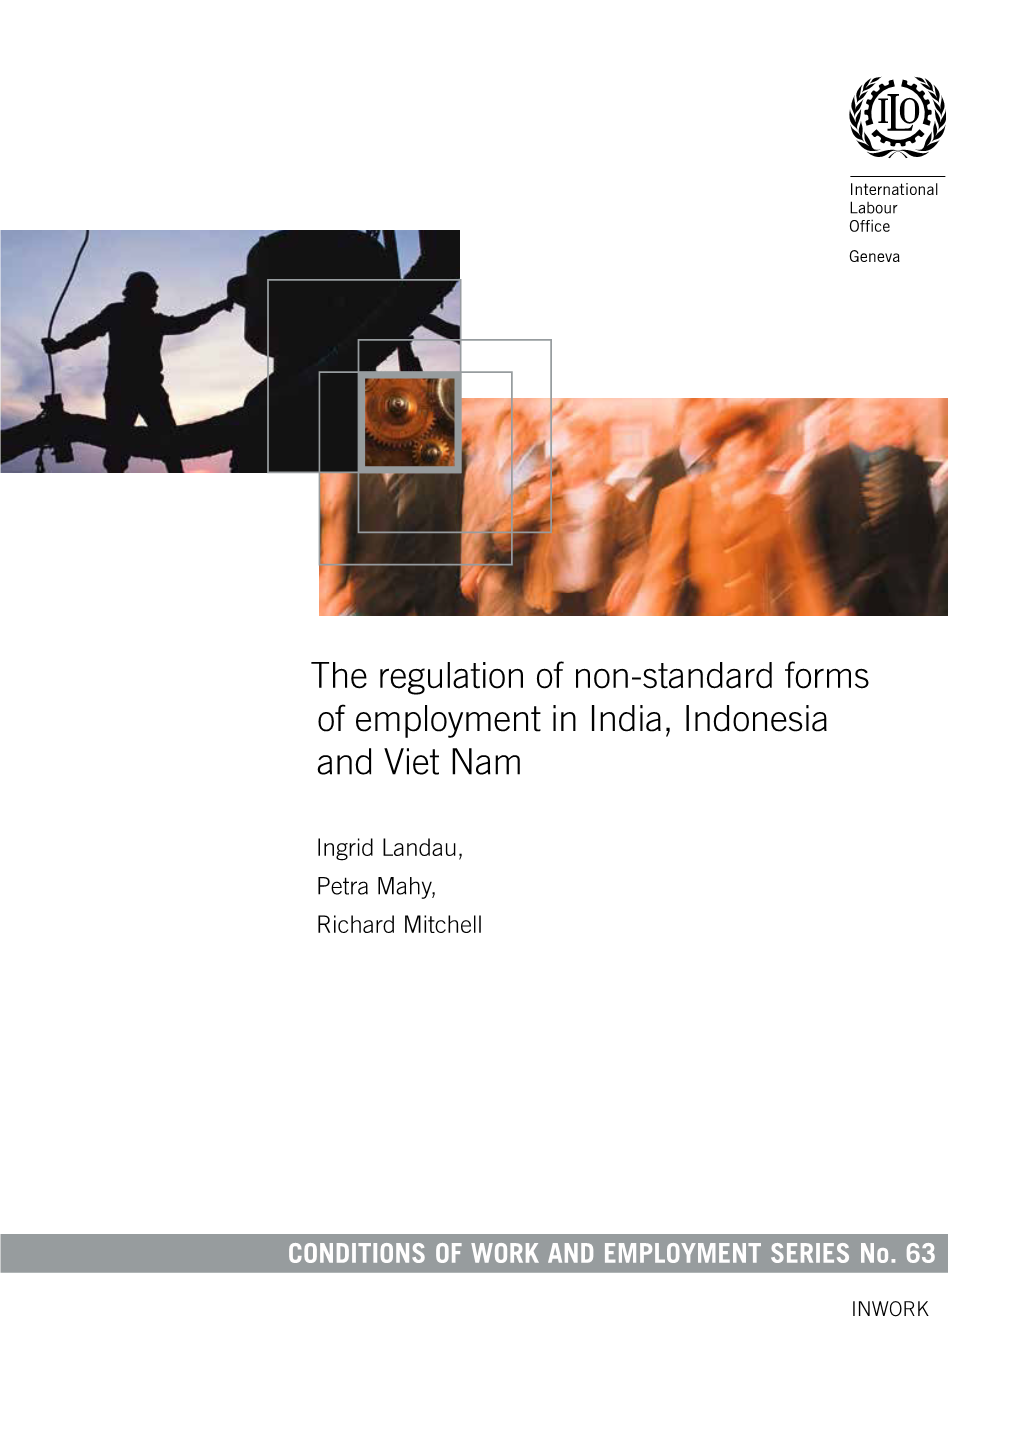 The Regulation of Non-Standard Forms of Employment in India, Indonesia and Viet Nam